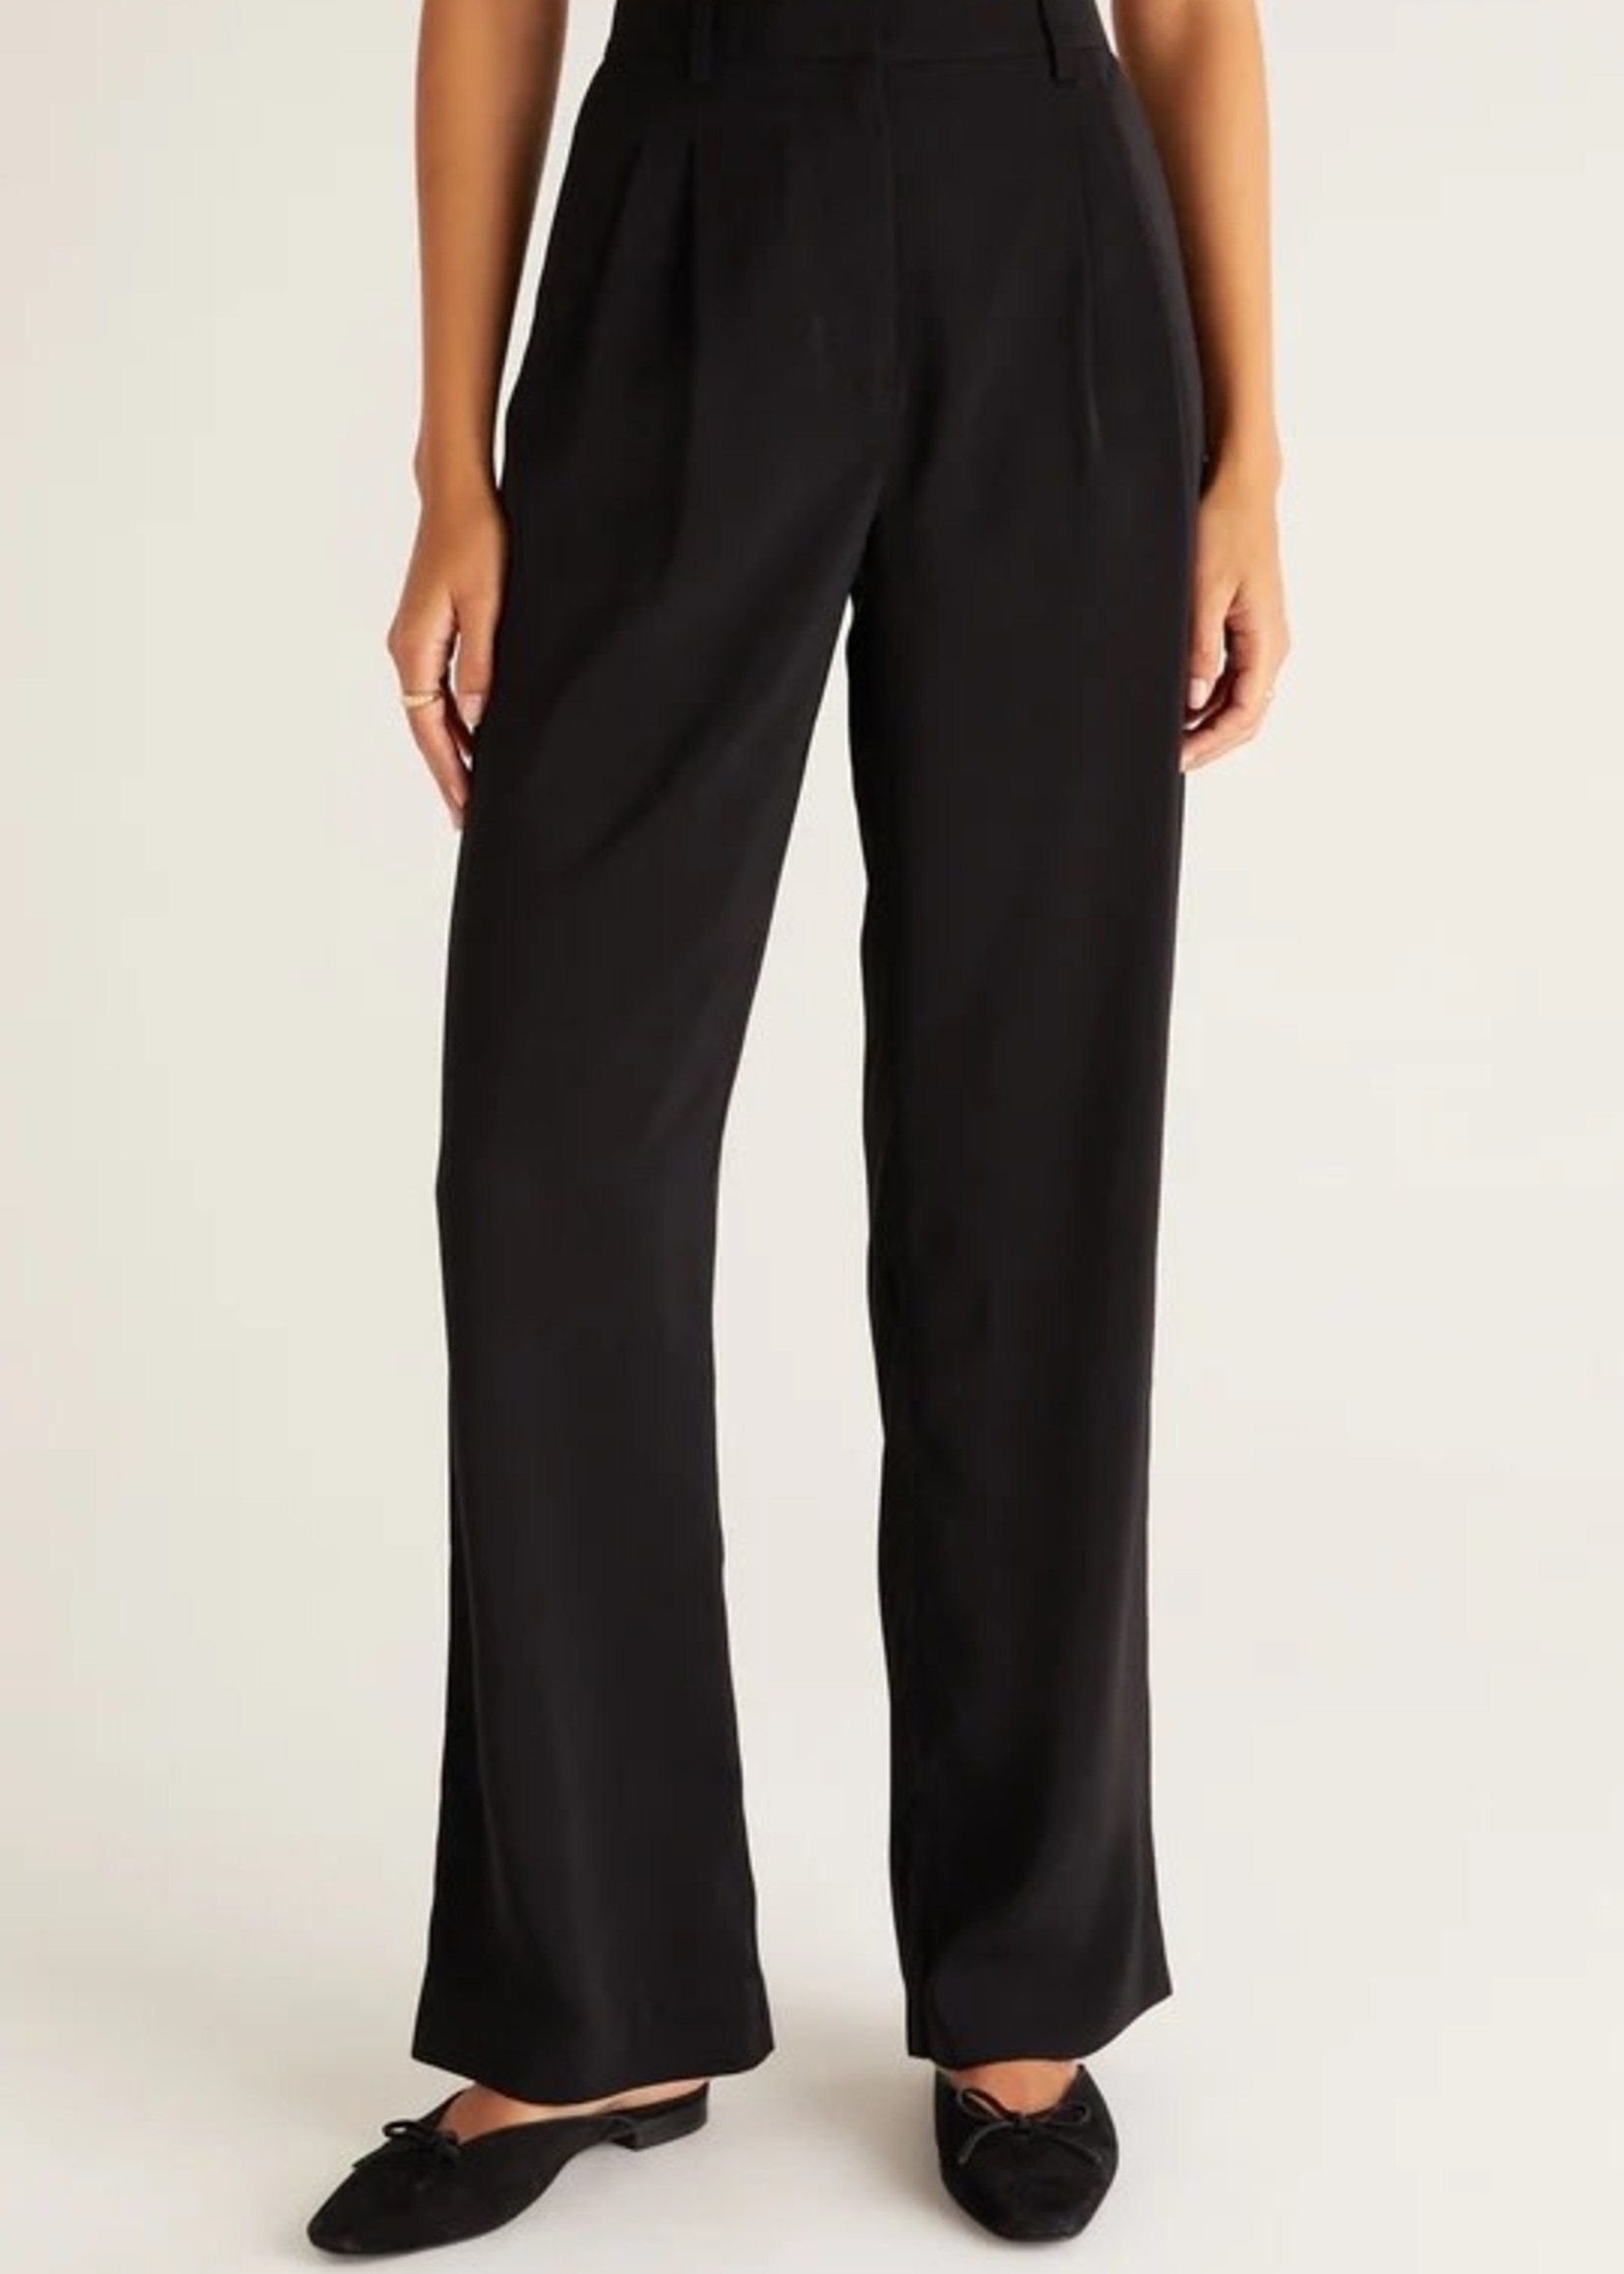 Z SUPPLY Lucy Twill Pant